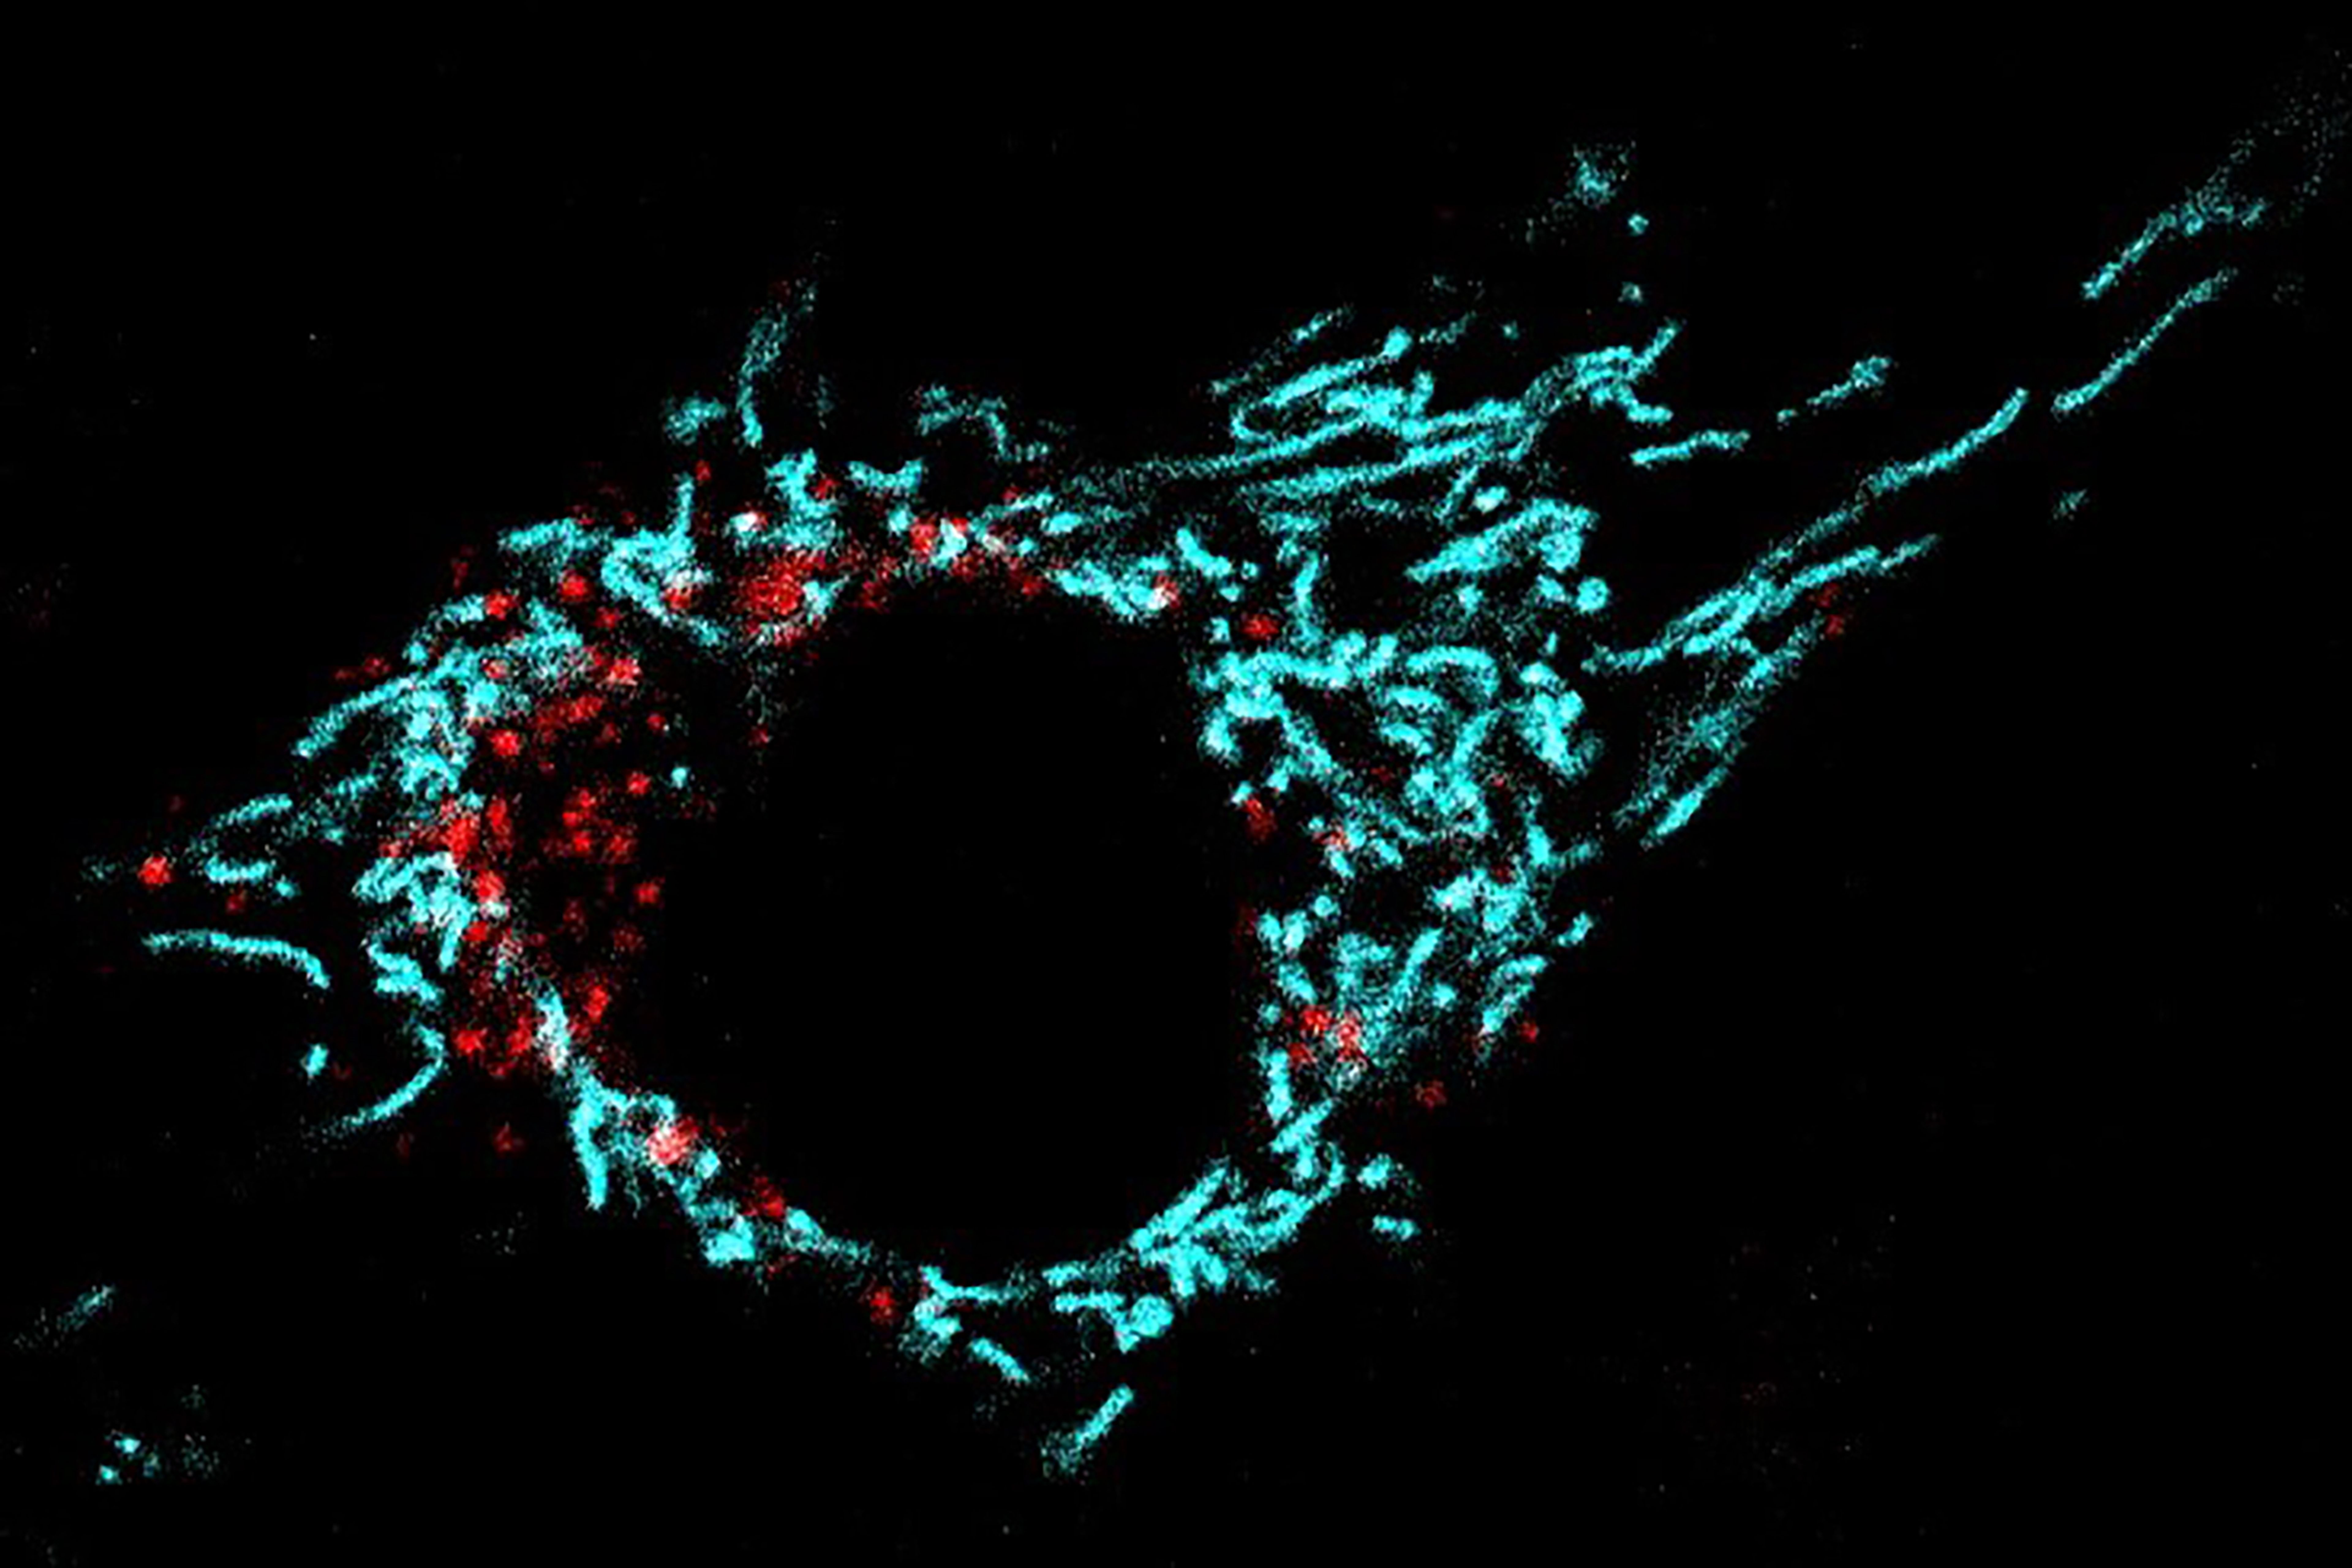 A muscle cell (C2C12 myoblast) stained with the mitochondrial marker mKEIMA. In cyan is represented the normal mitochondrial network. The red dots show mitochondria undergoing mitophagy. (Credit: Davide D’Amico/EPFL)